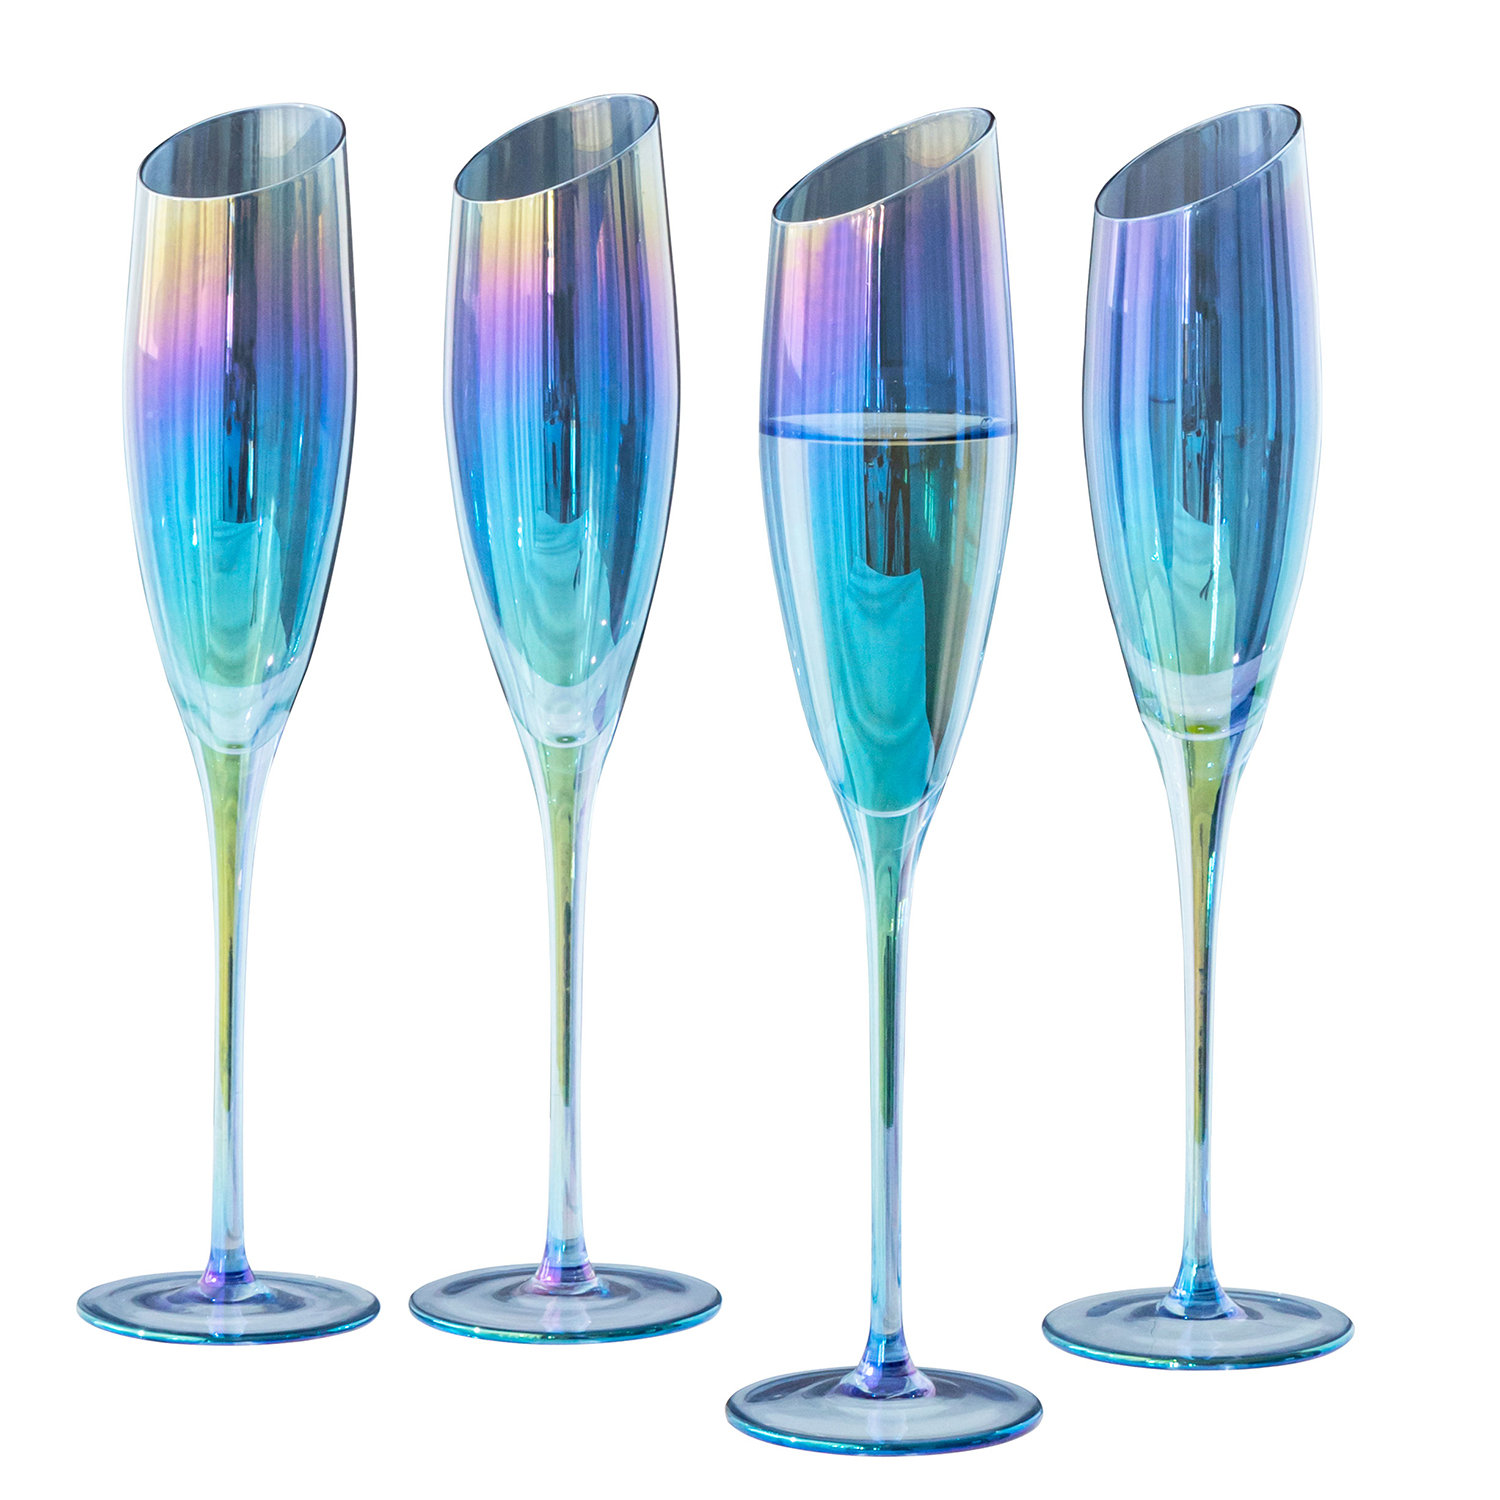 Gursharon 4 Piece 12 oz Hammered Champagne Flute Set (Set of 4) Everly Quinn Color: Silver